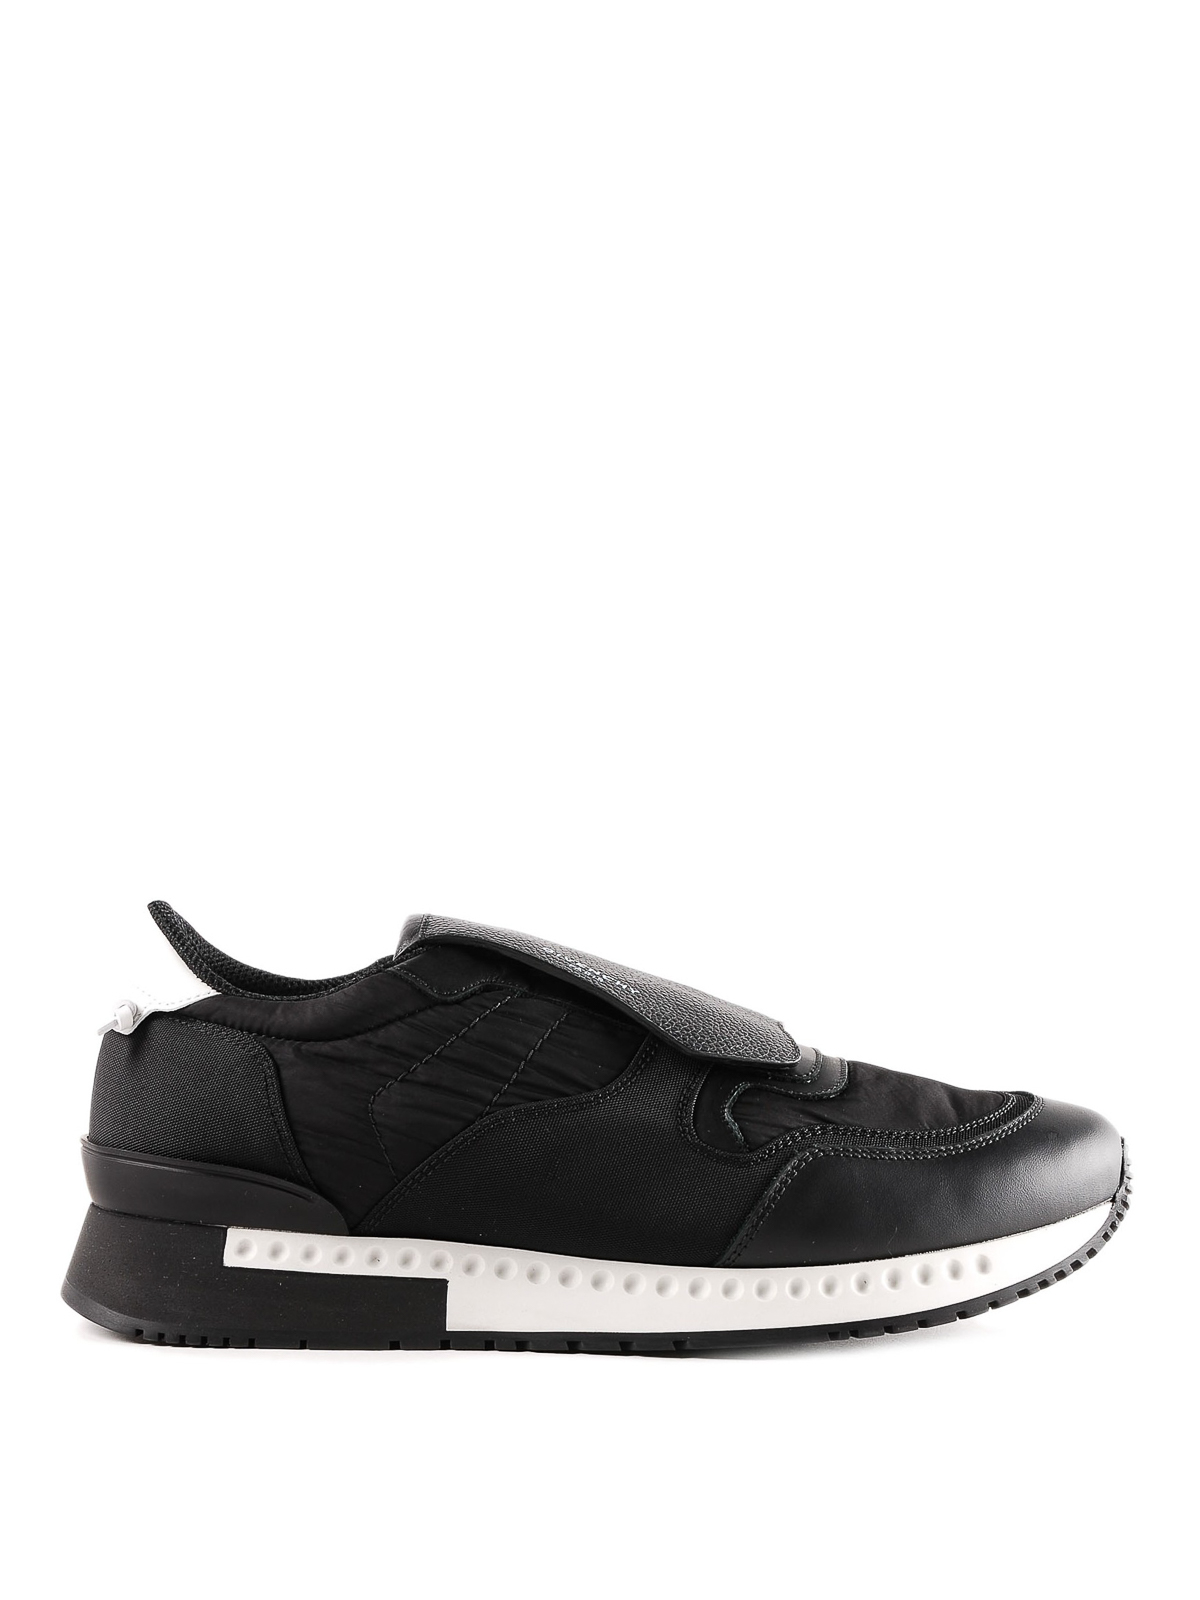 leraar Scenario Cater Trainers Givenchy - Active Show runner flap sneakers - BH0015H02L004